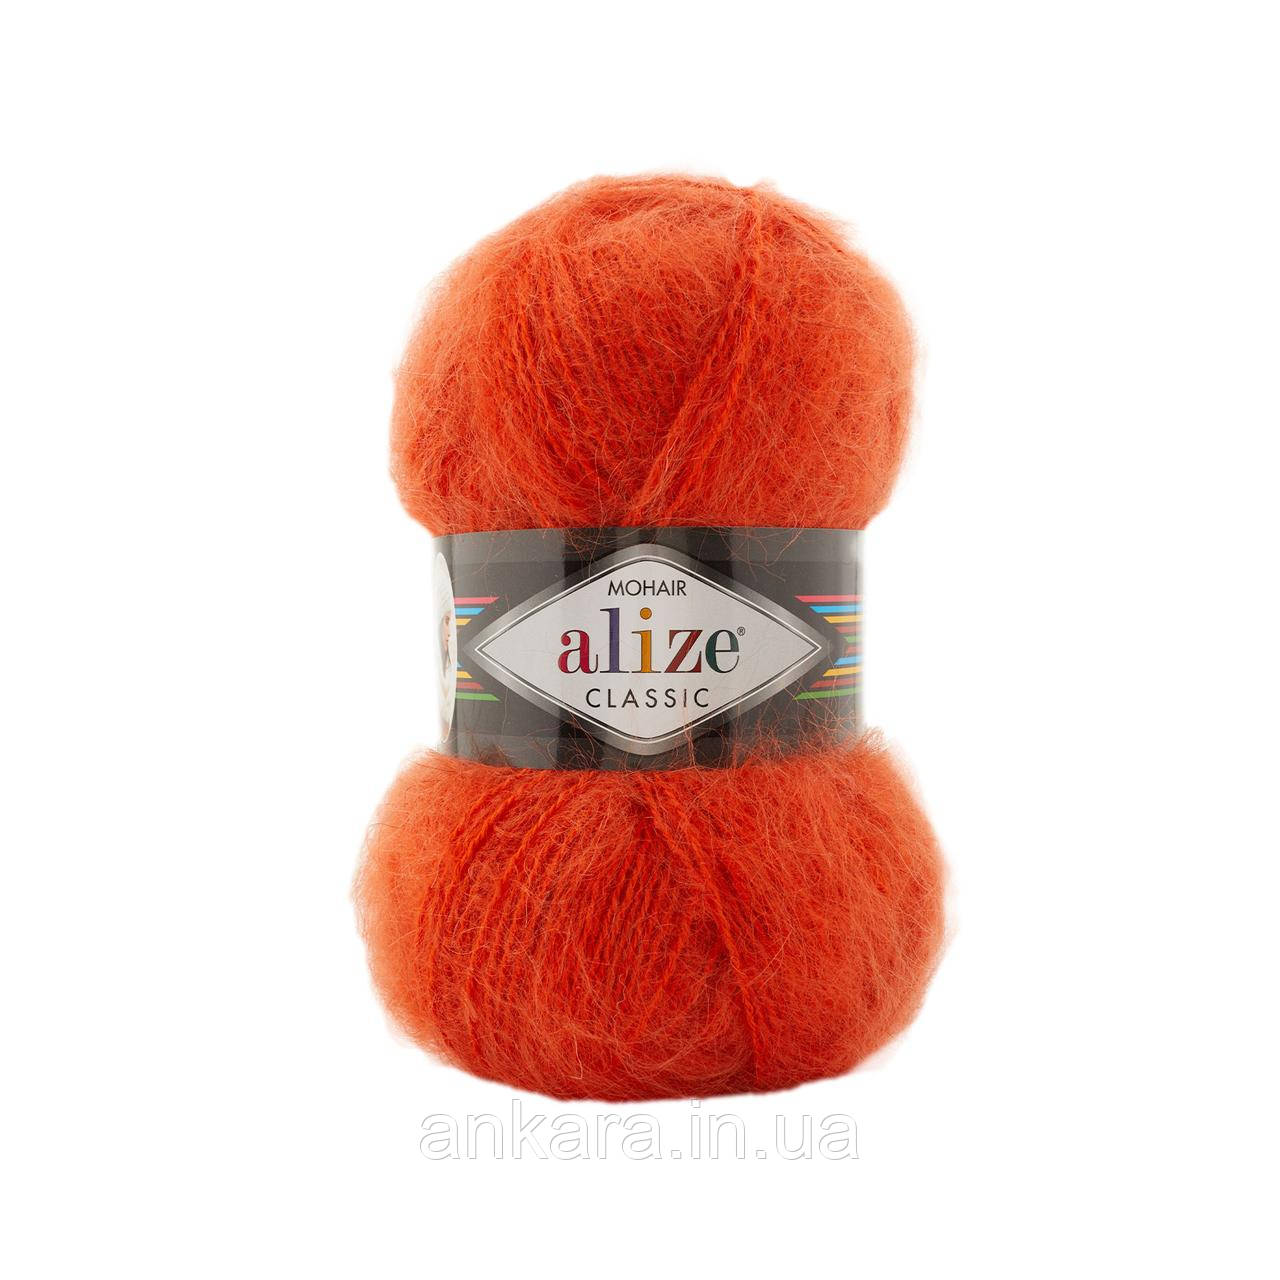 Alize Mohair Classic 37